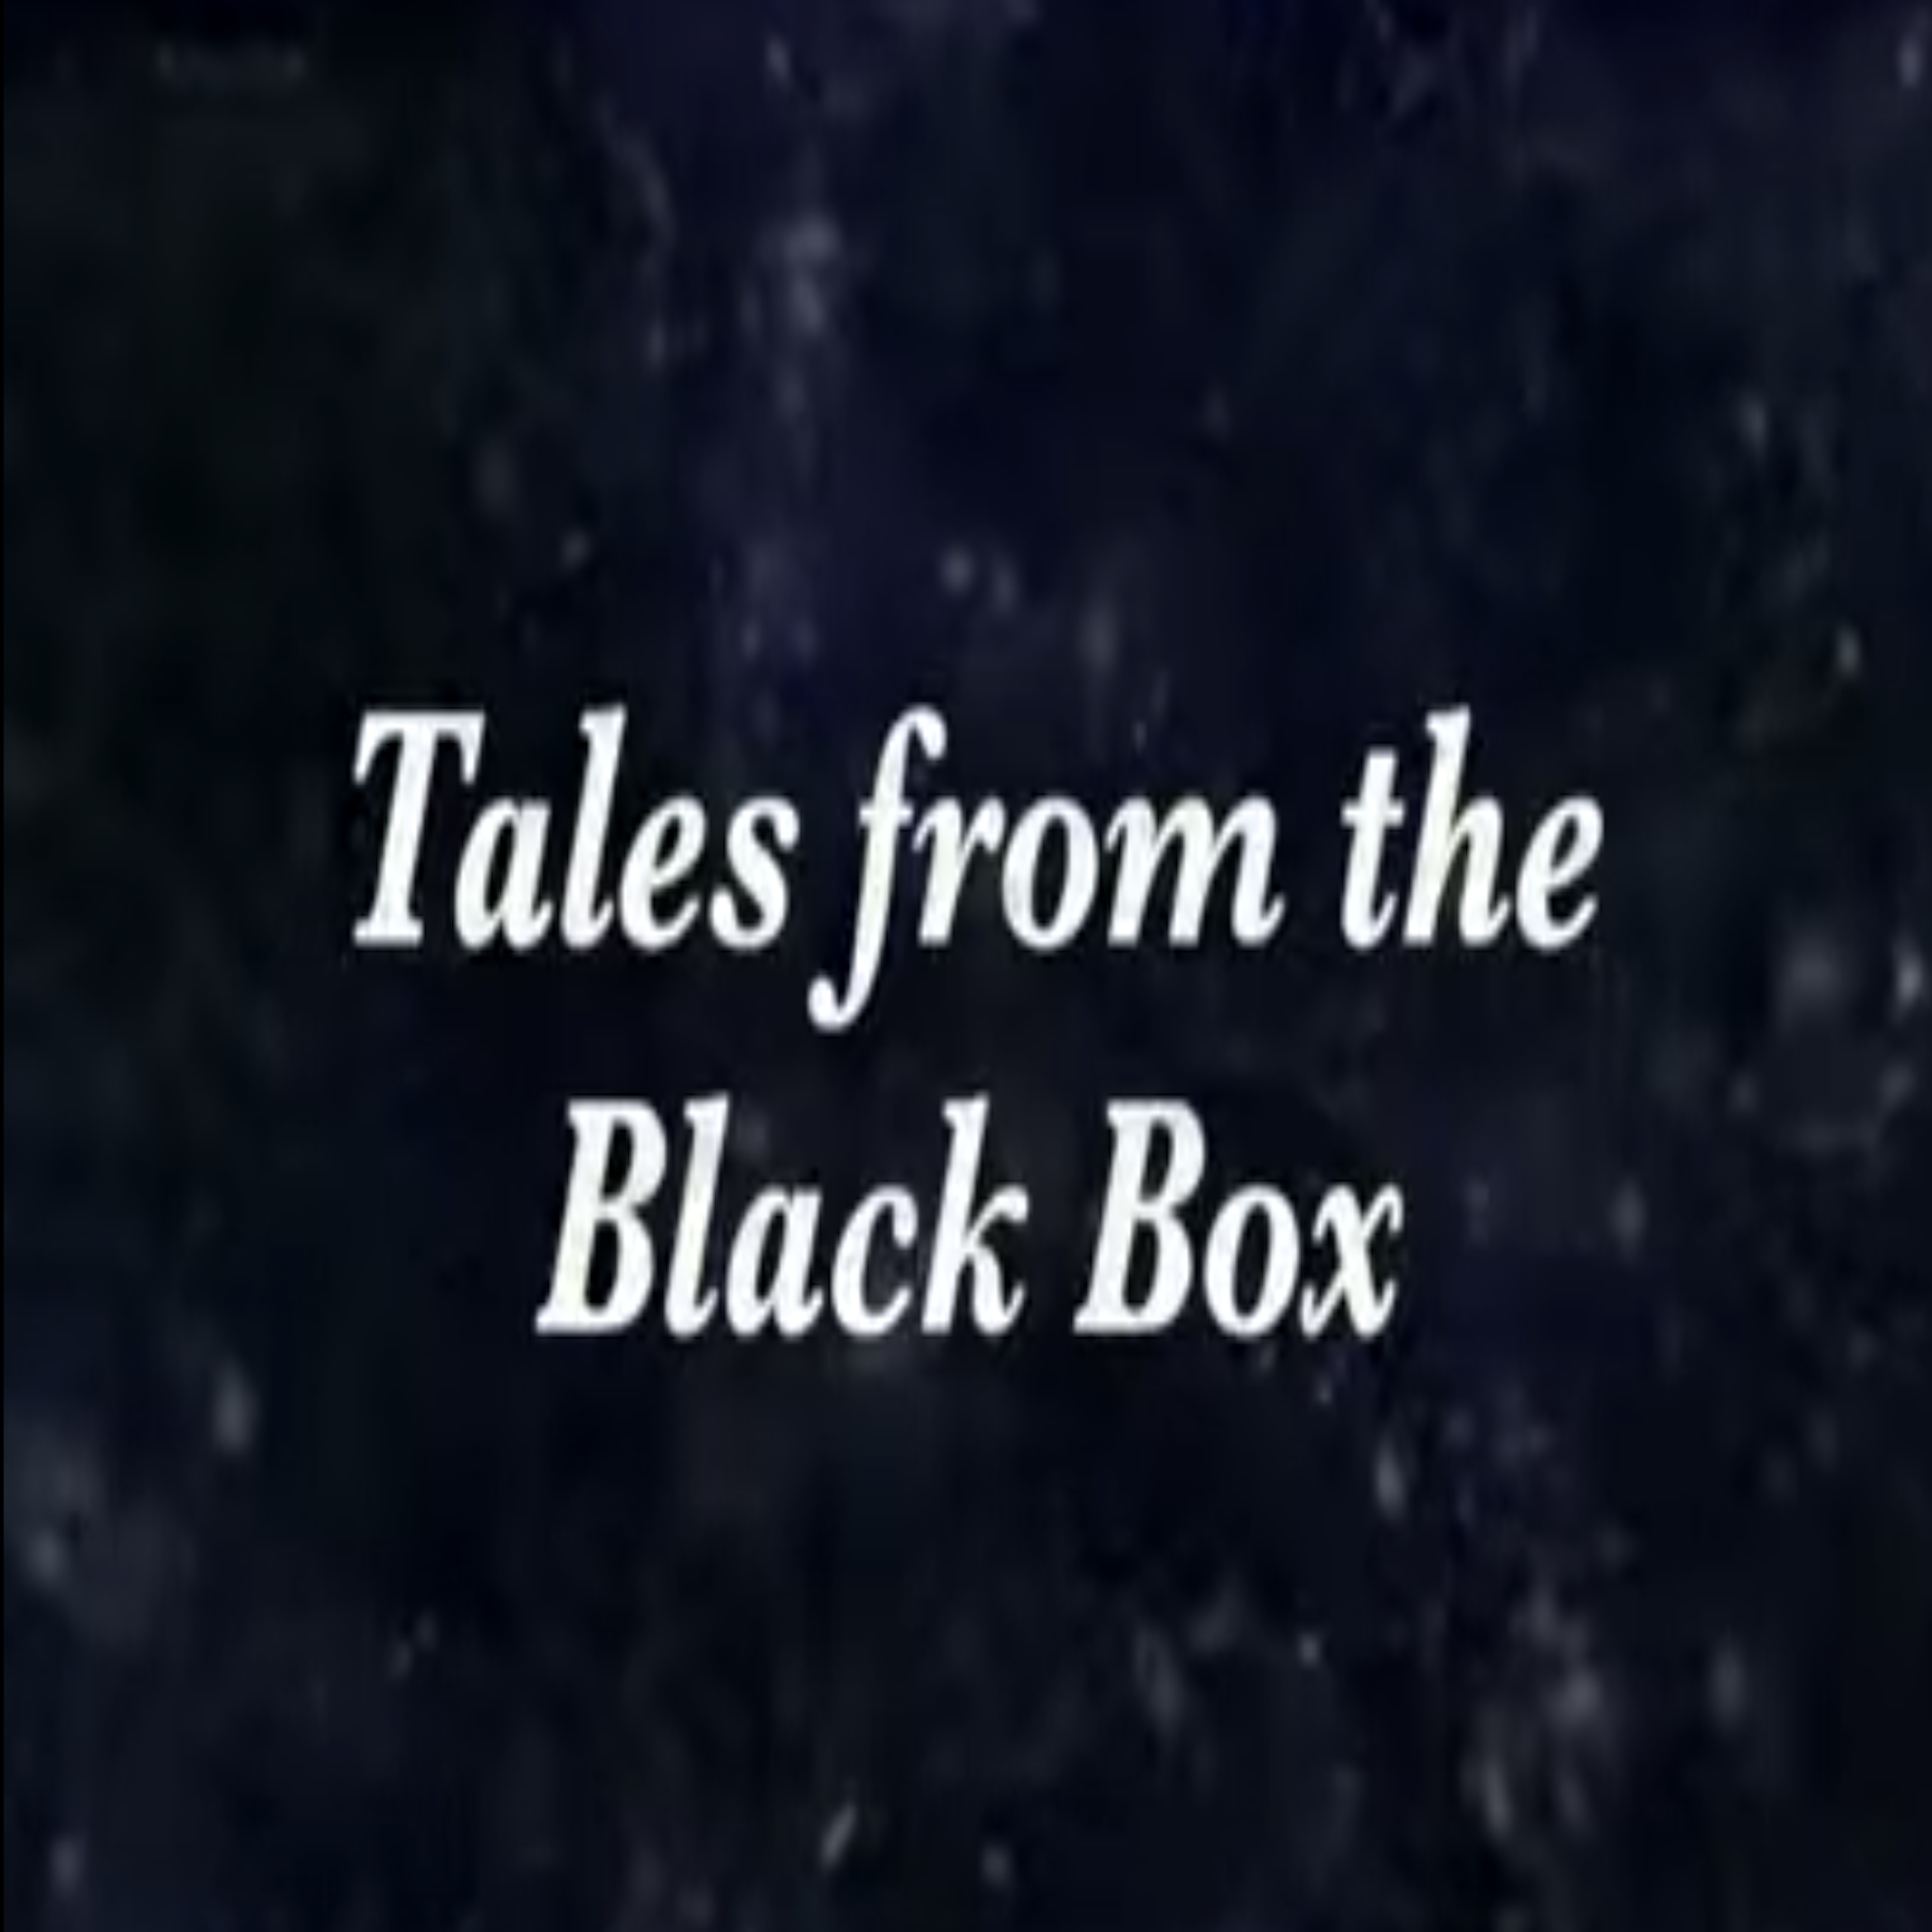 "Tales from the Black Box" Teaser Trailer #1